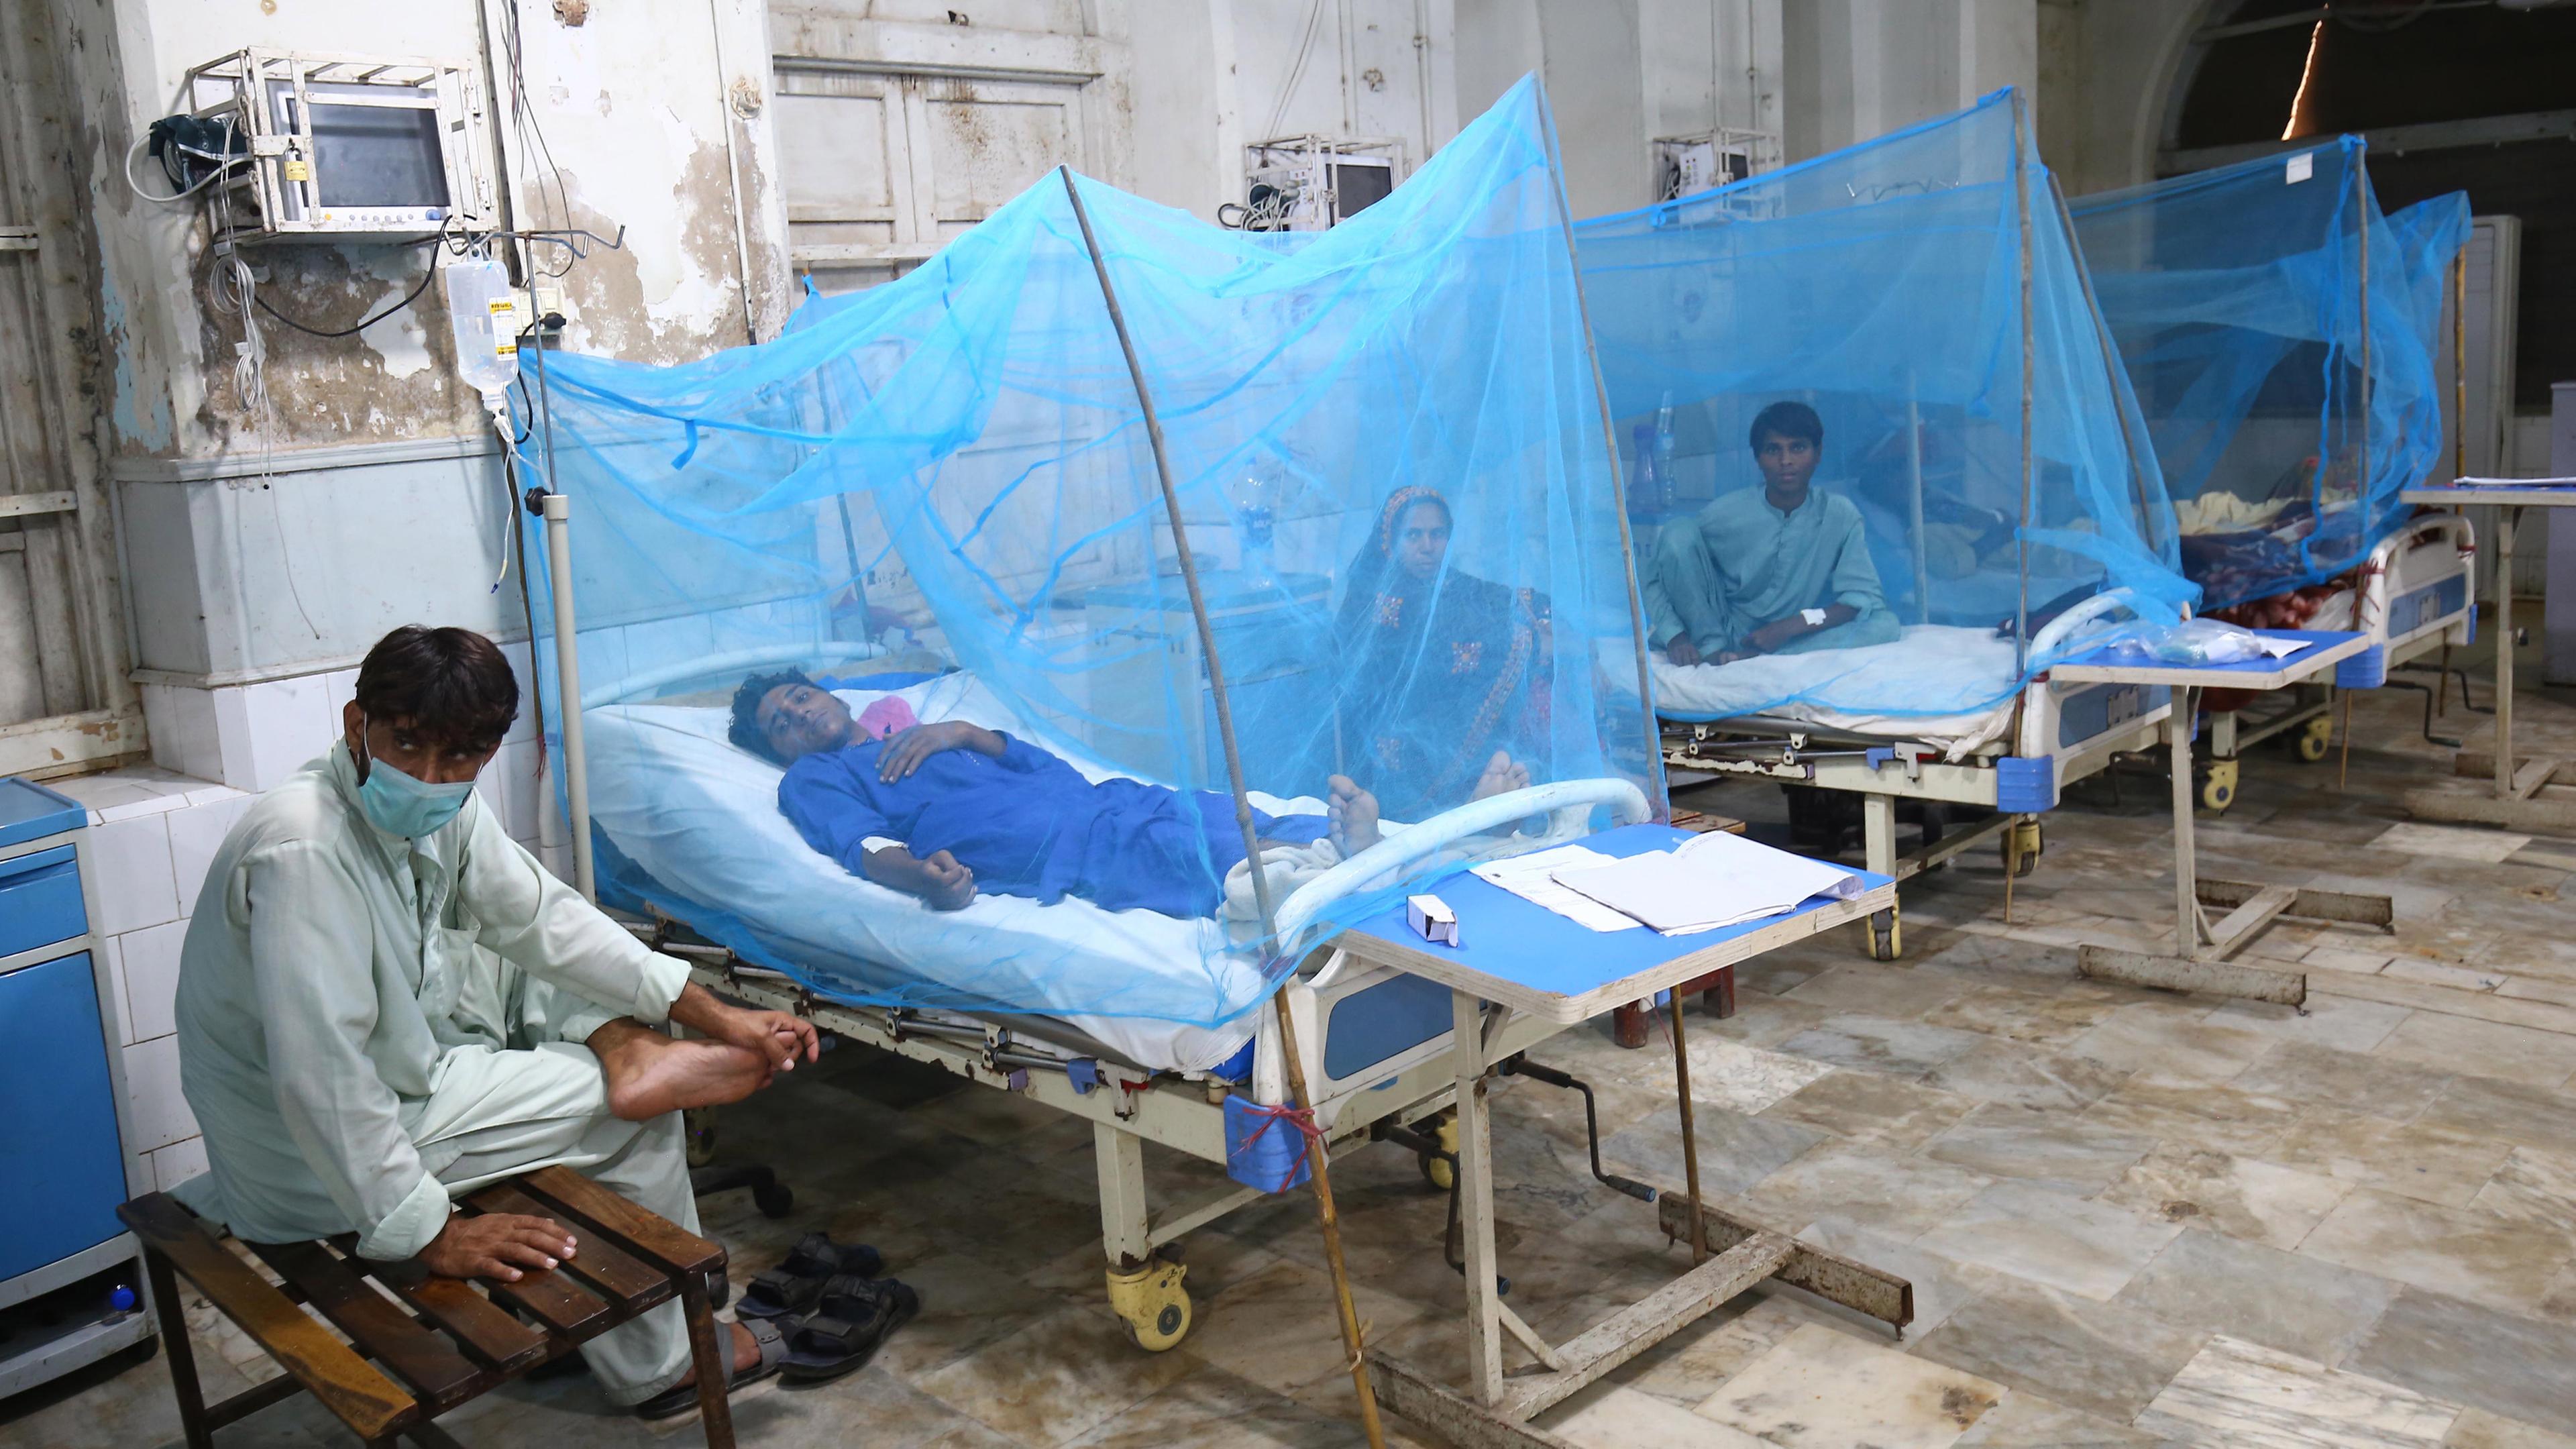 Patients suffering from dengue fever receive medical treatment at an isolation ward of a hospital in Karachi, Pakistan